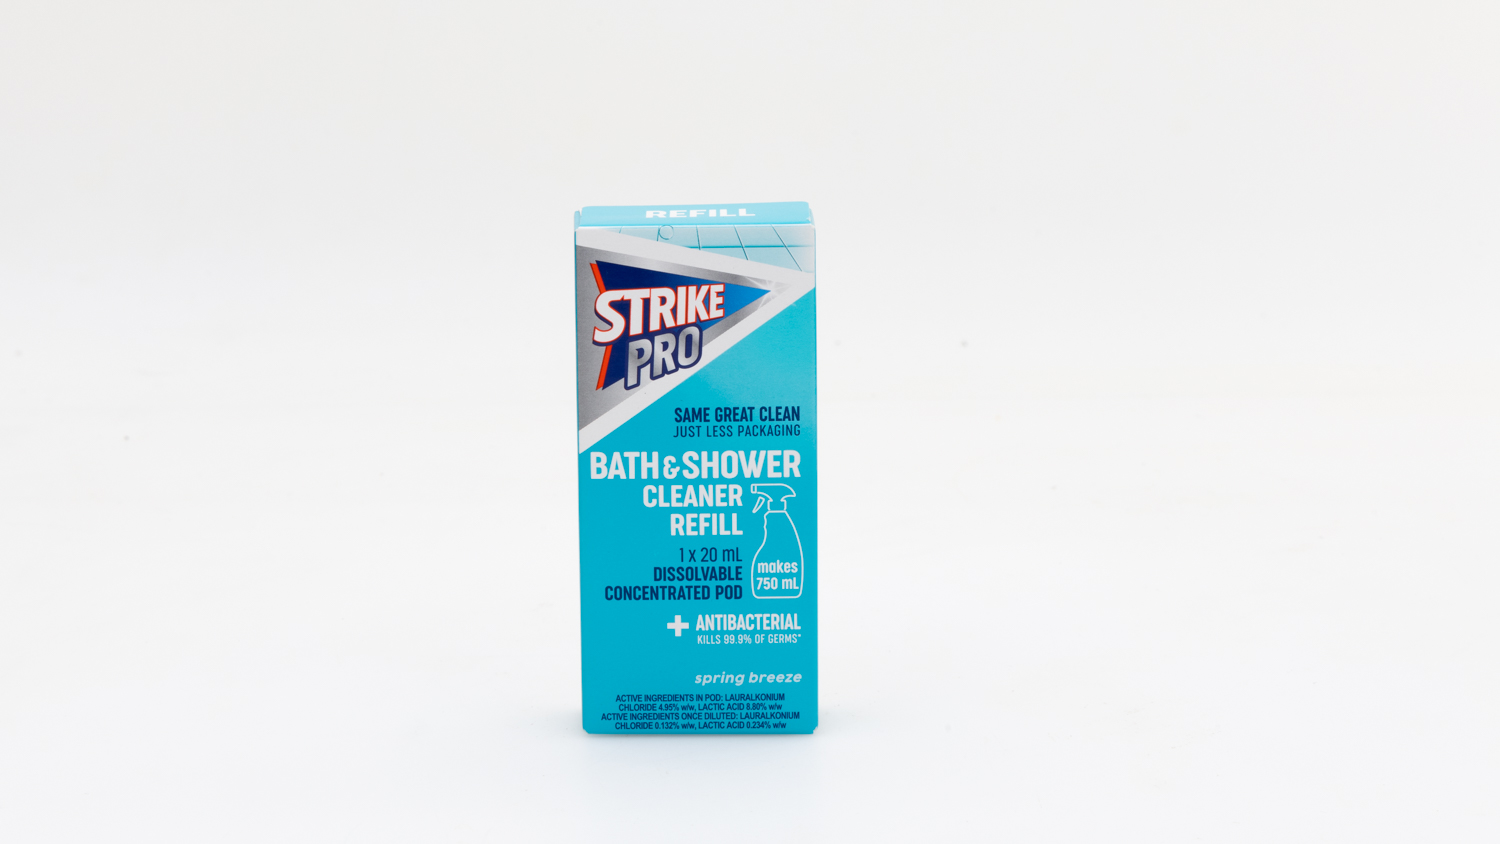 Woolworths Strike Pro Bath & Shower Cleaner Refill carousel image